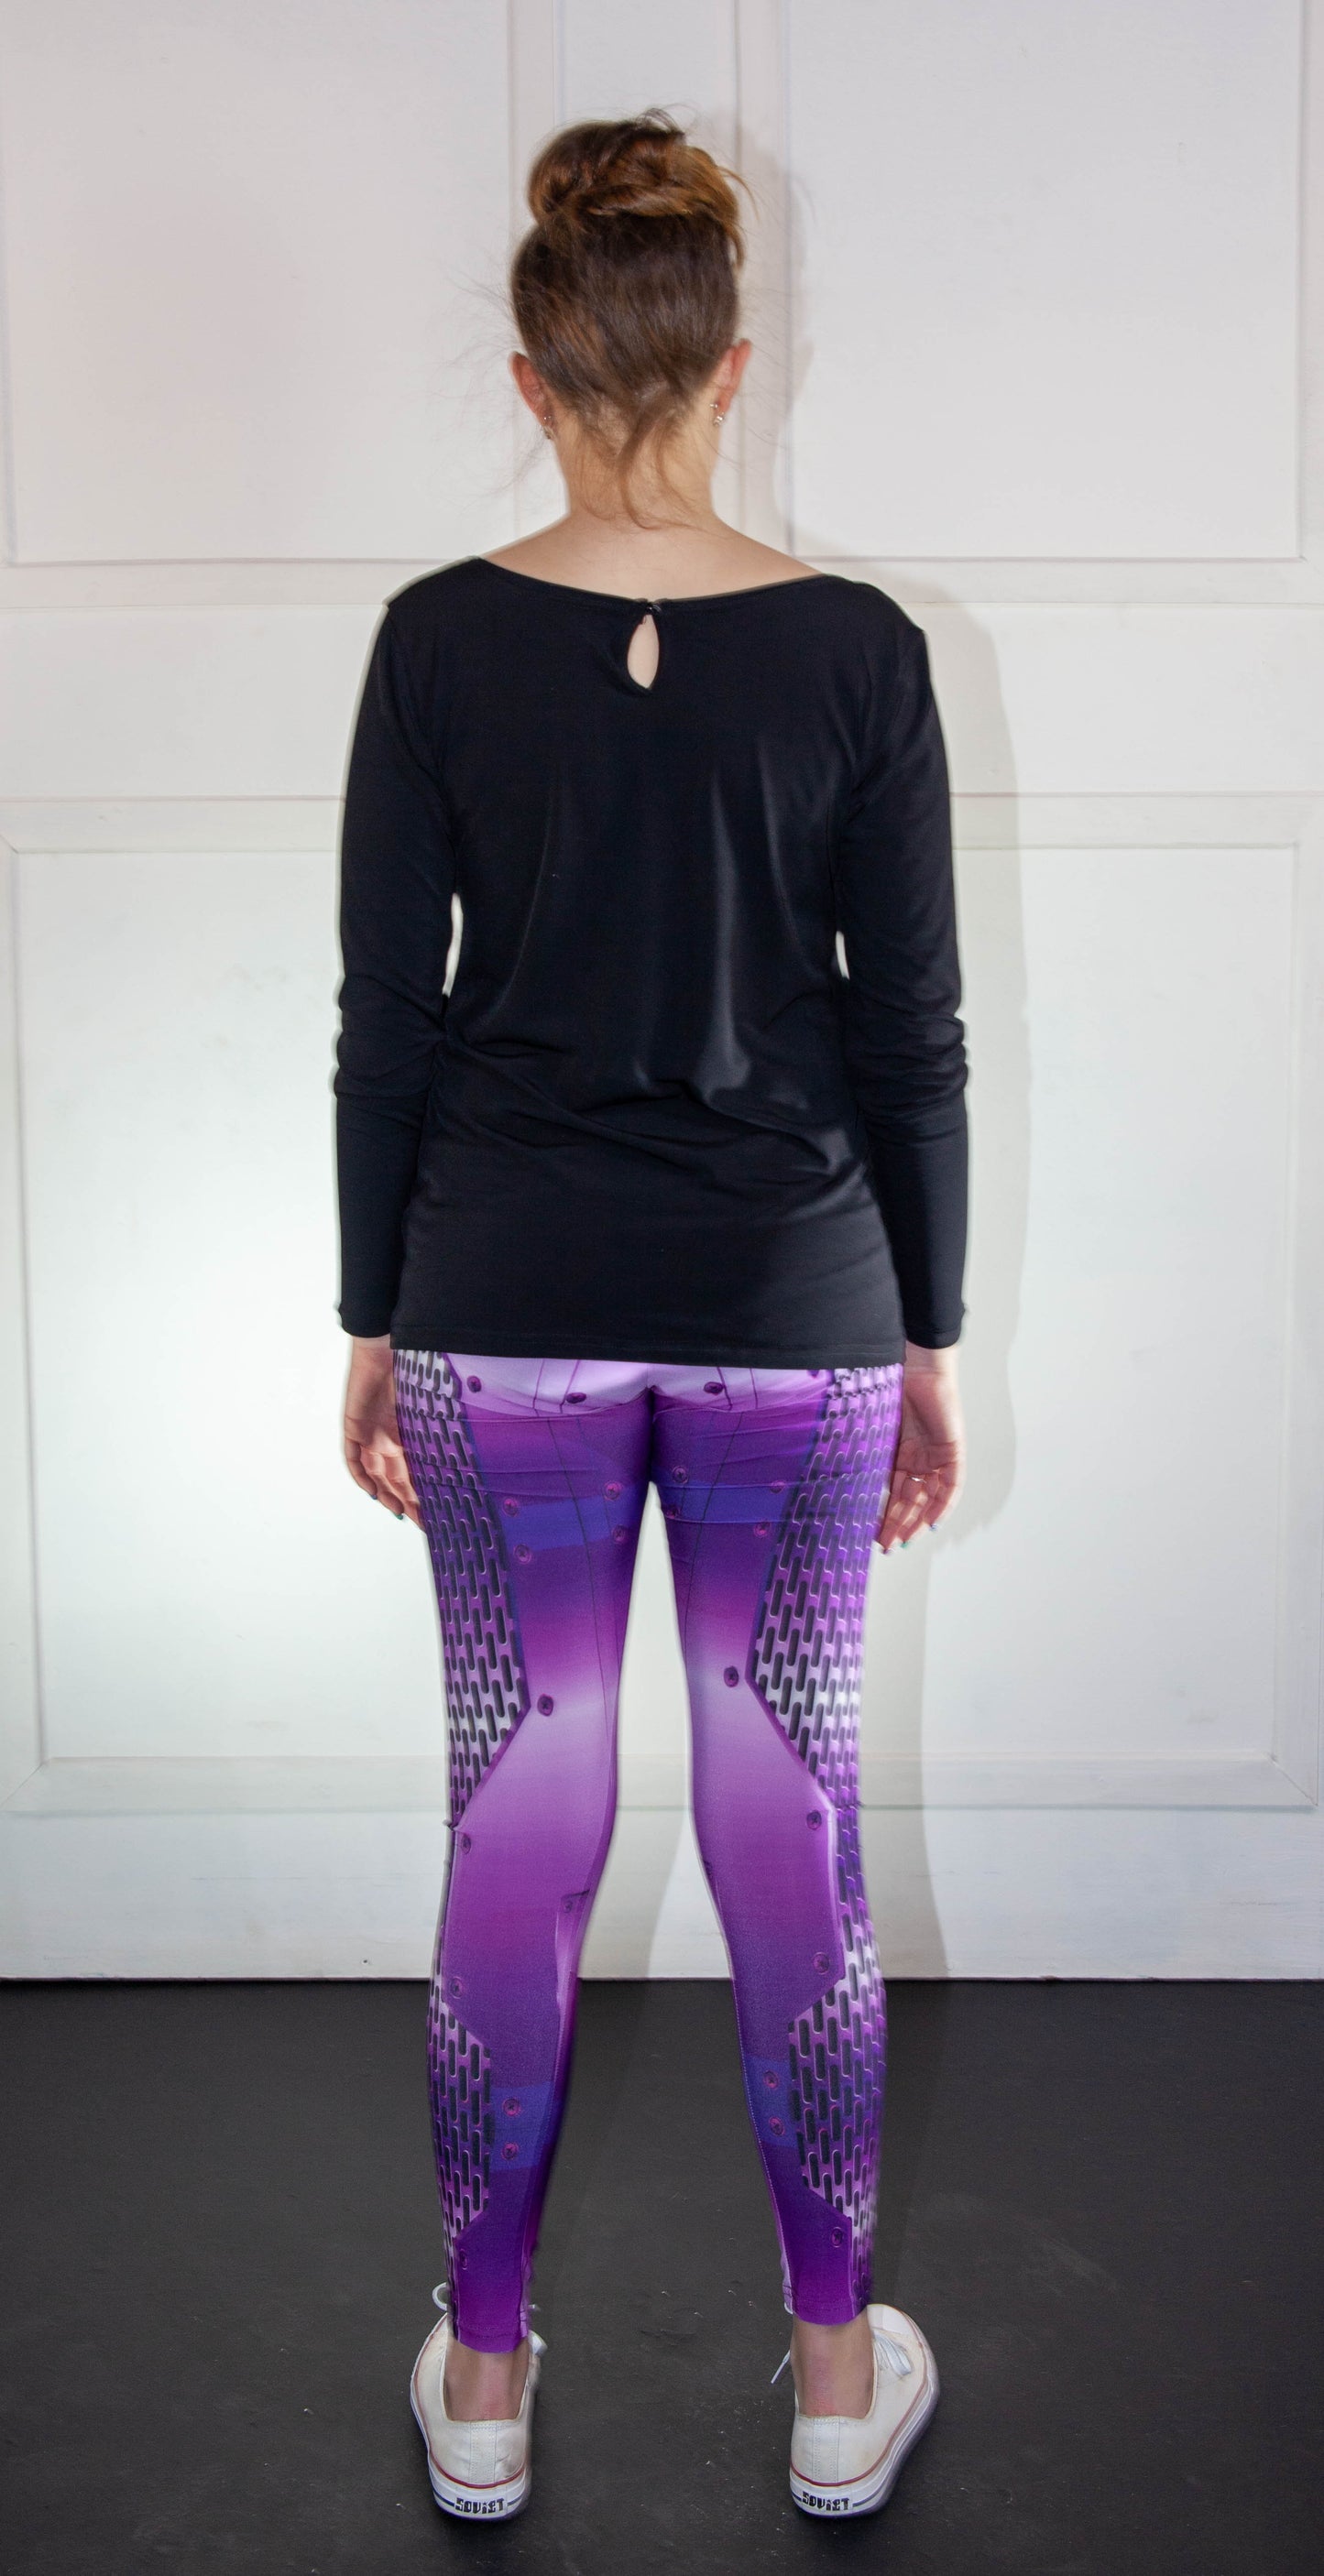 Leggings - CyberStorm Purple and White